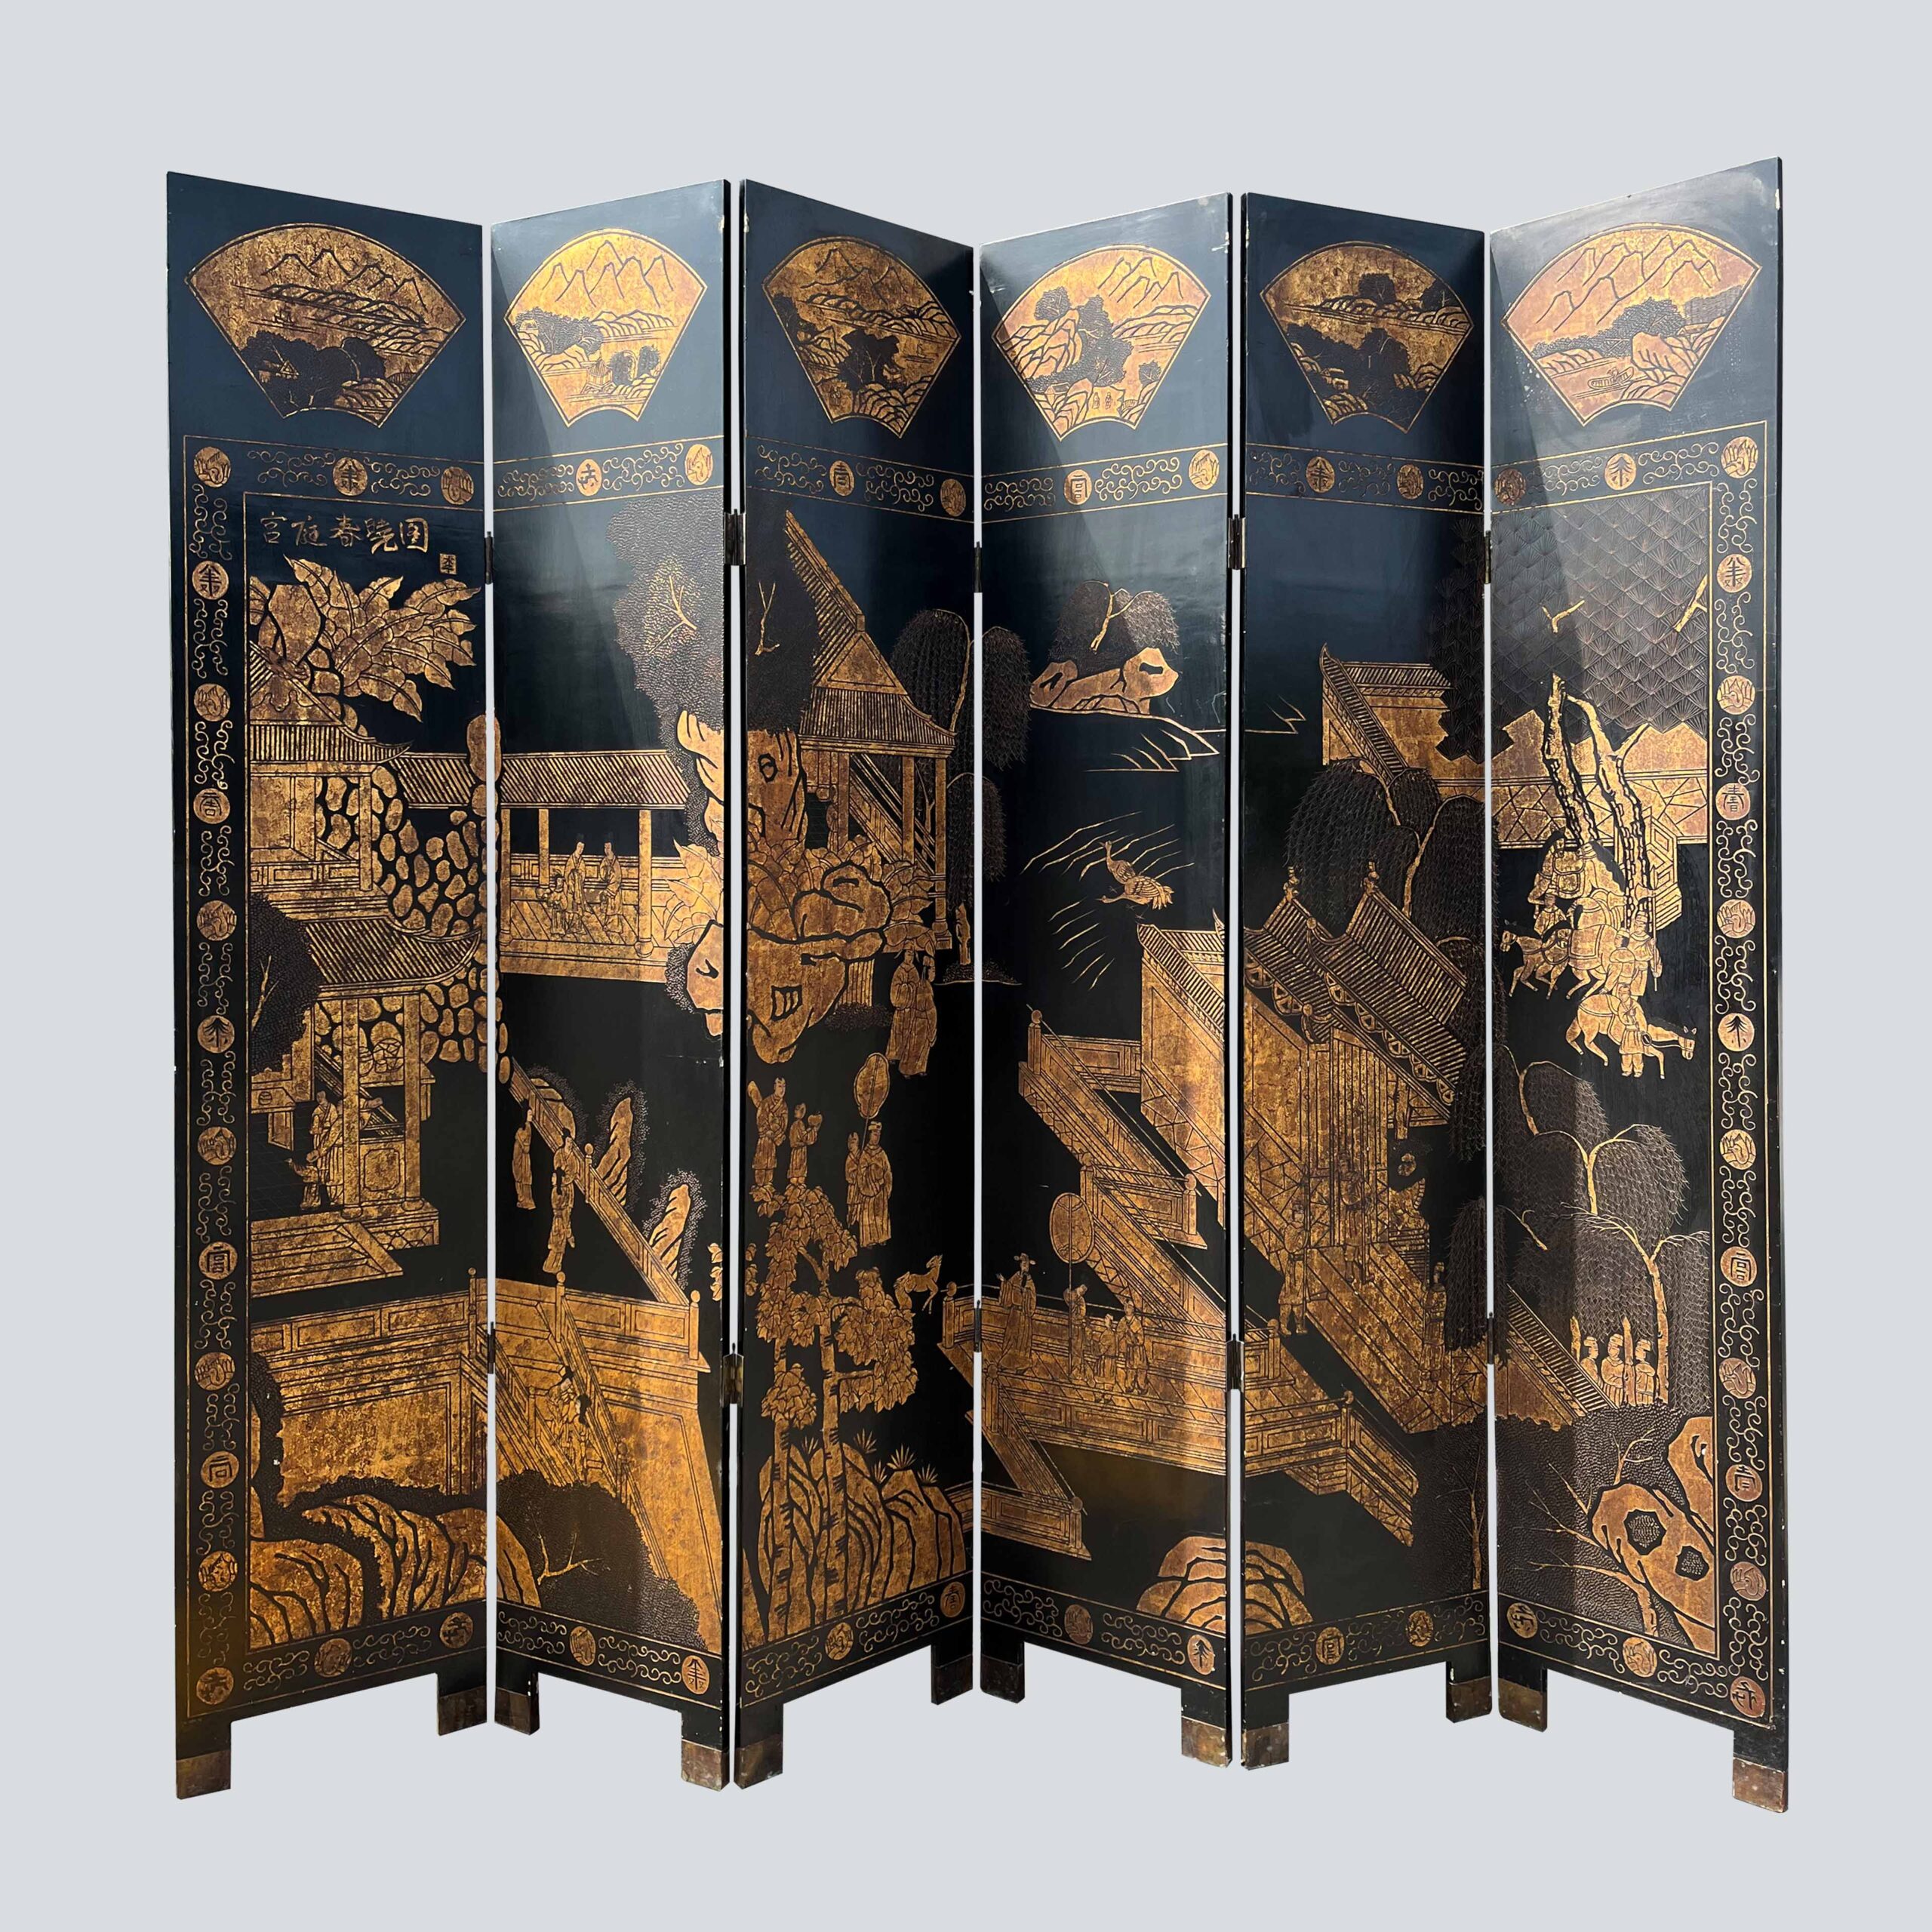 Antique Chinese Double-sided Lacquer Screen (six pieces), 19th to 